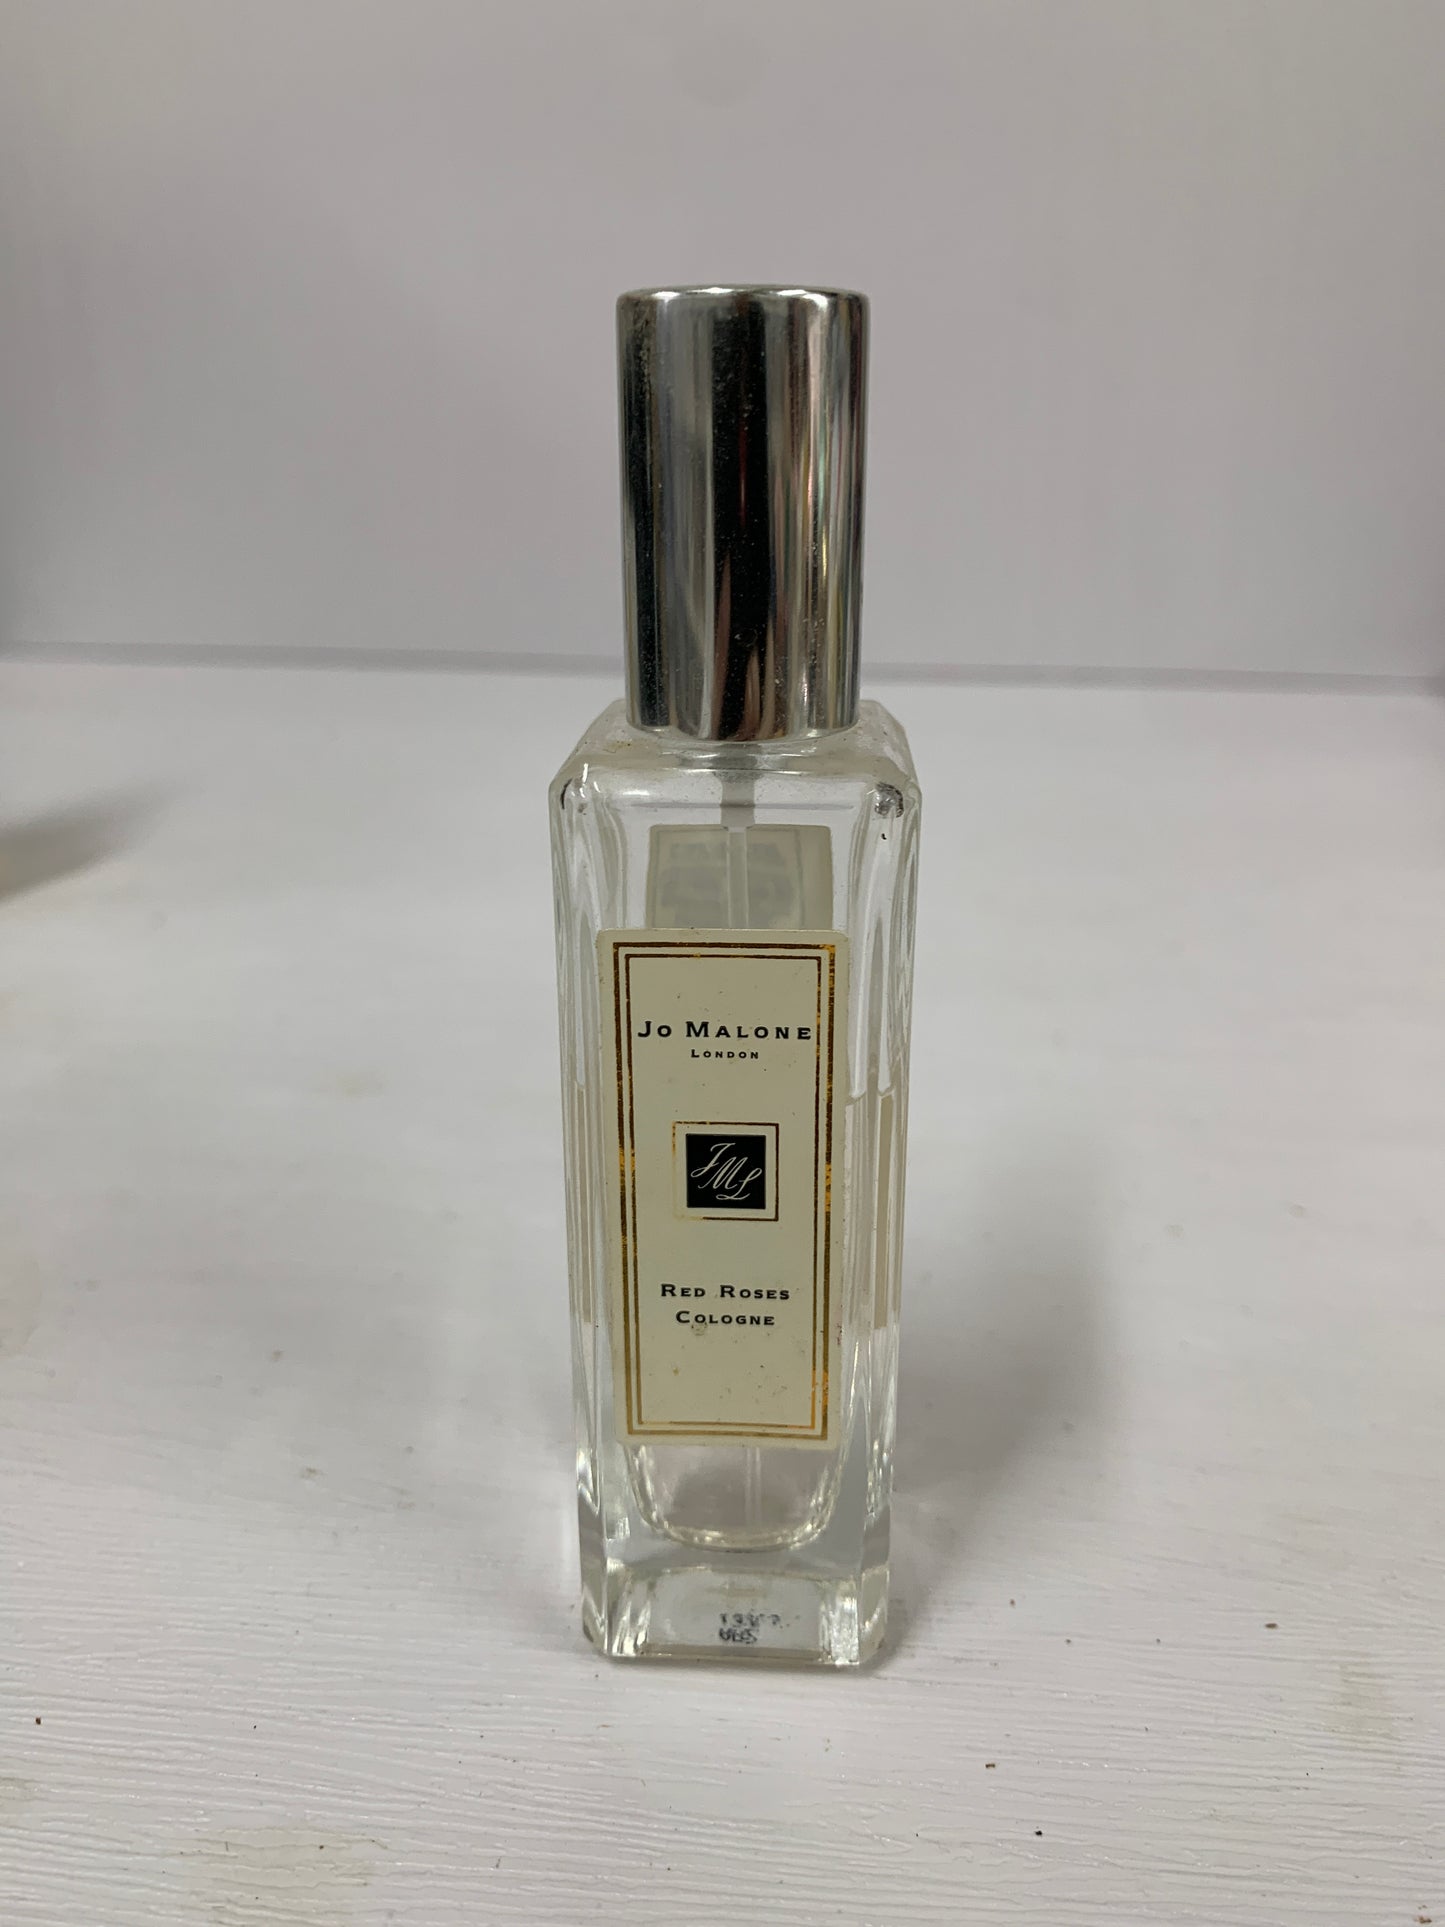 Jo Malone Red roses cologne 30ml 1 oz - OCT21